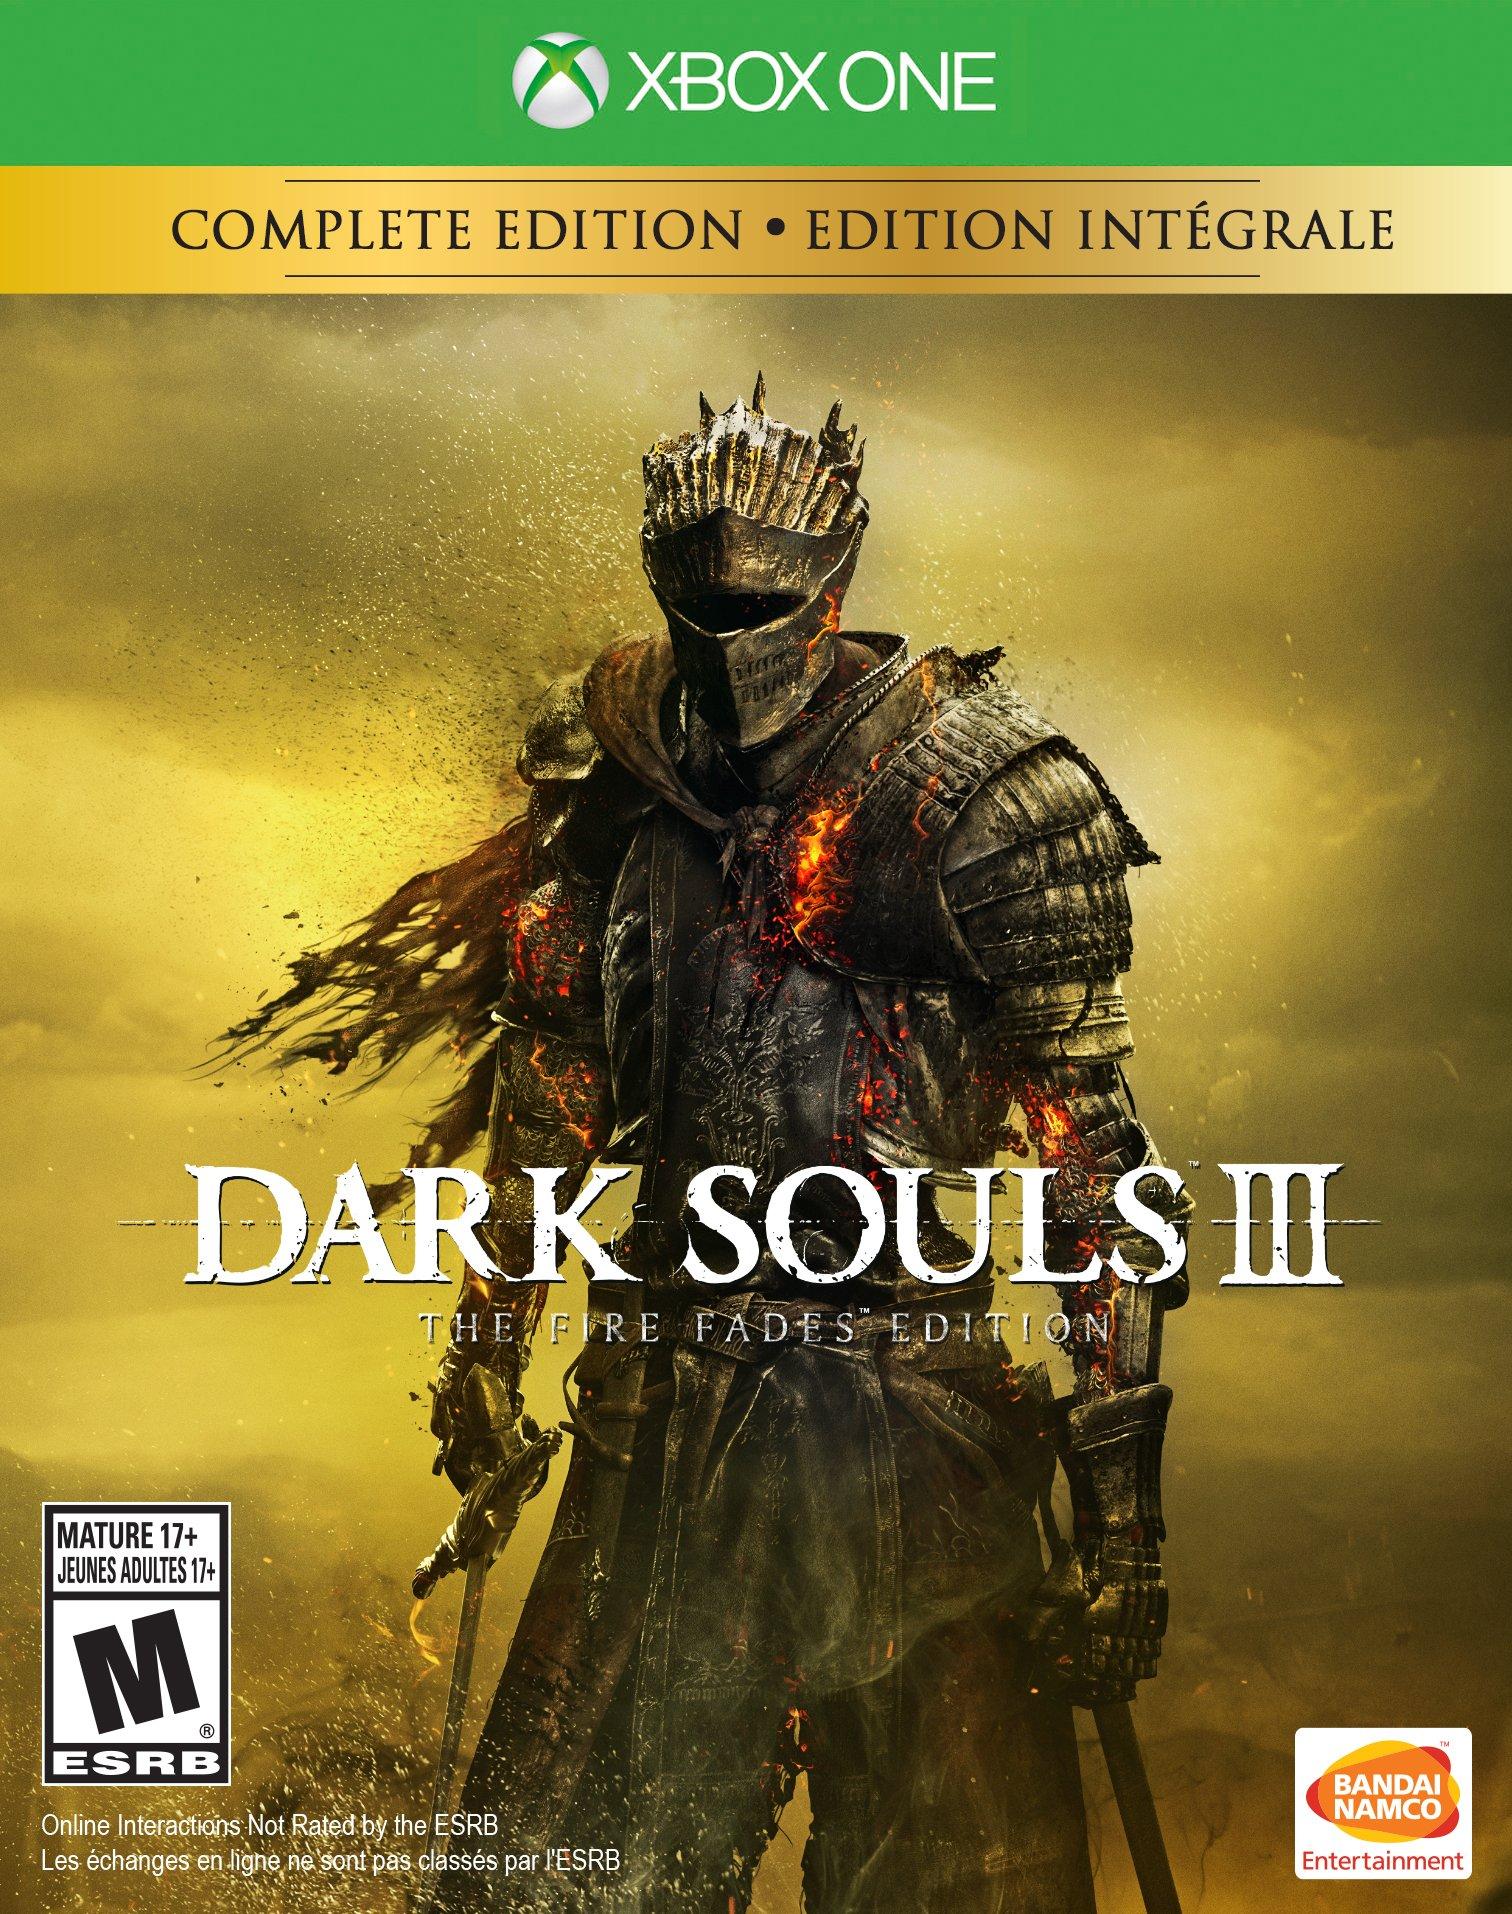 Dark Souls Remastered (Trilogy Box) [Limited Edition] for PlayStation 4